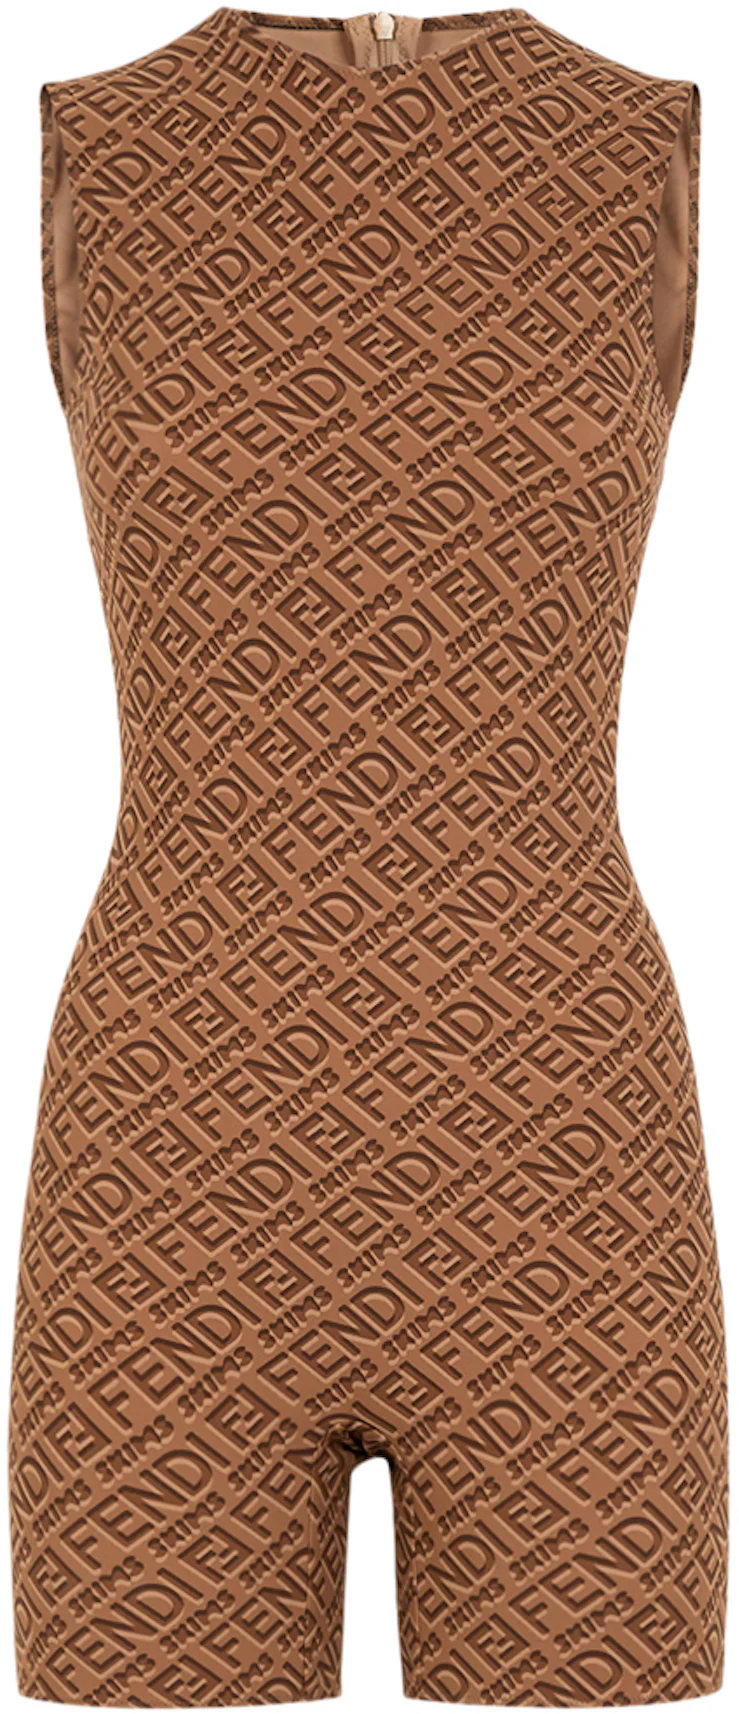 Fendi Skims beige brown bodysuit NEW with tags India